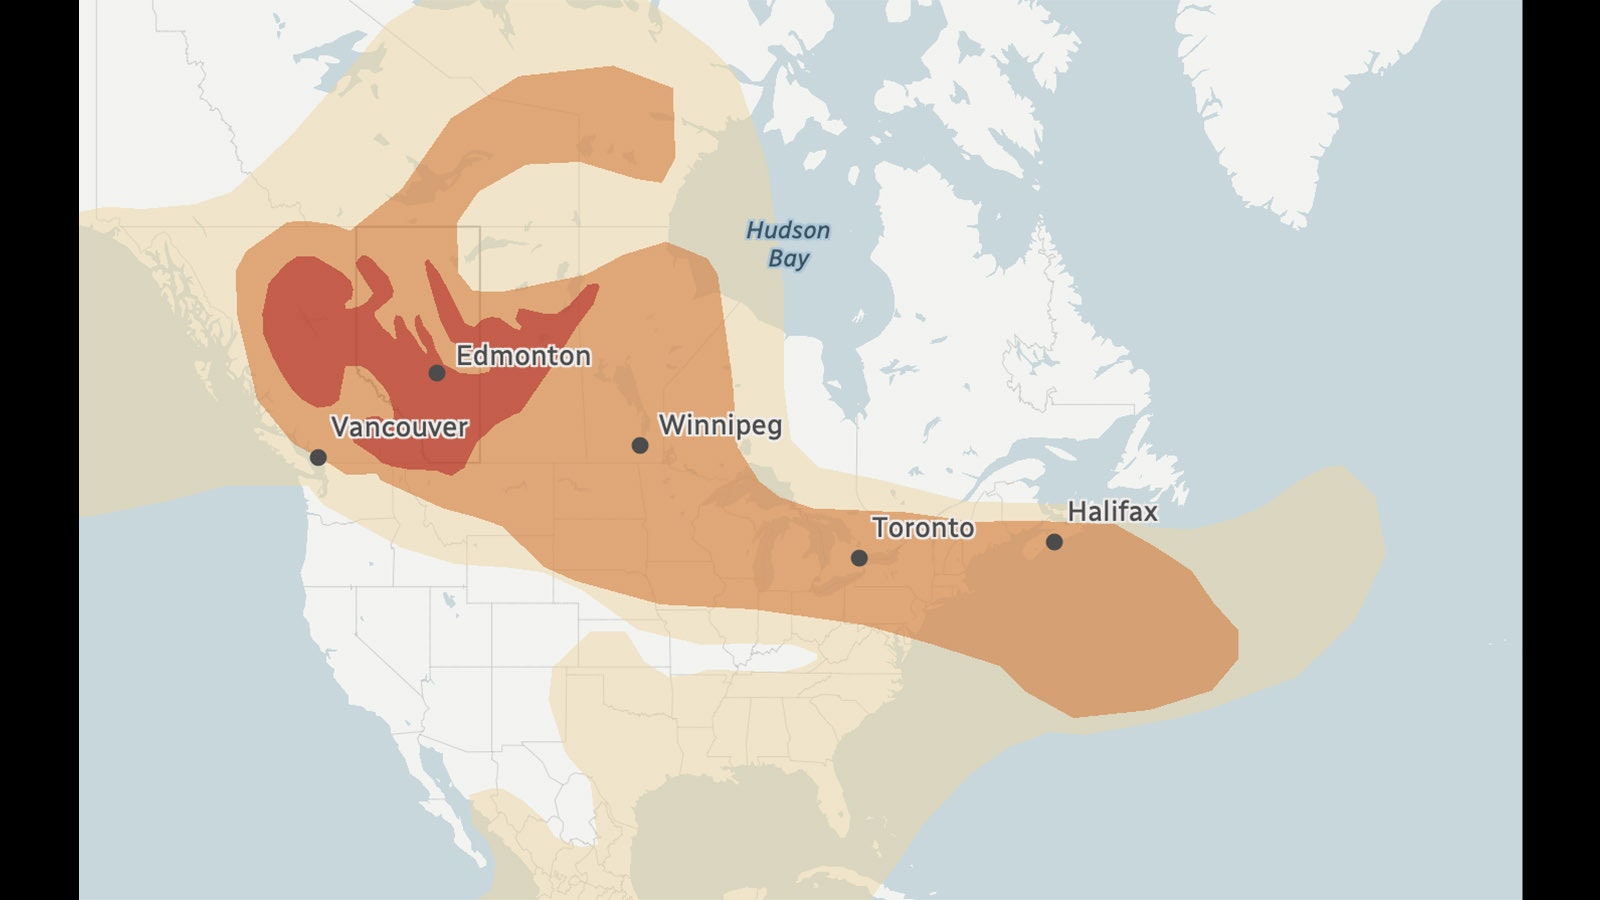 This illustration shows the pattern of smoke travel from Canada wildfires.